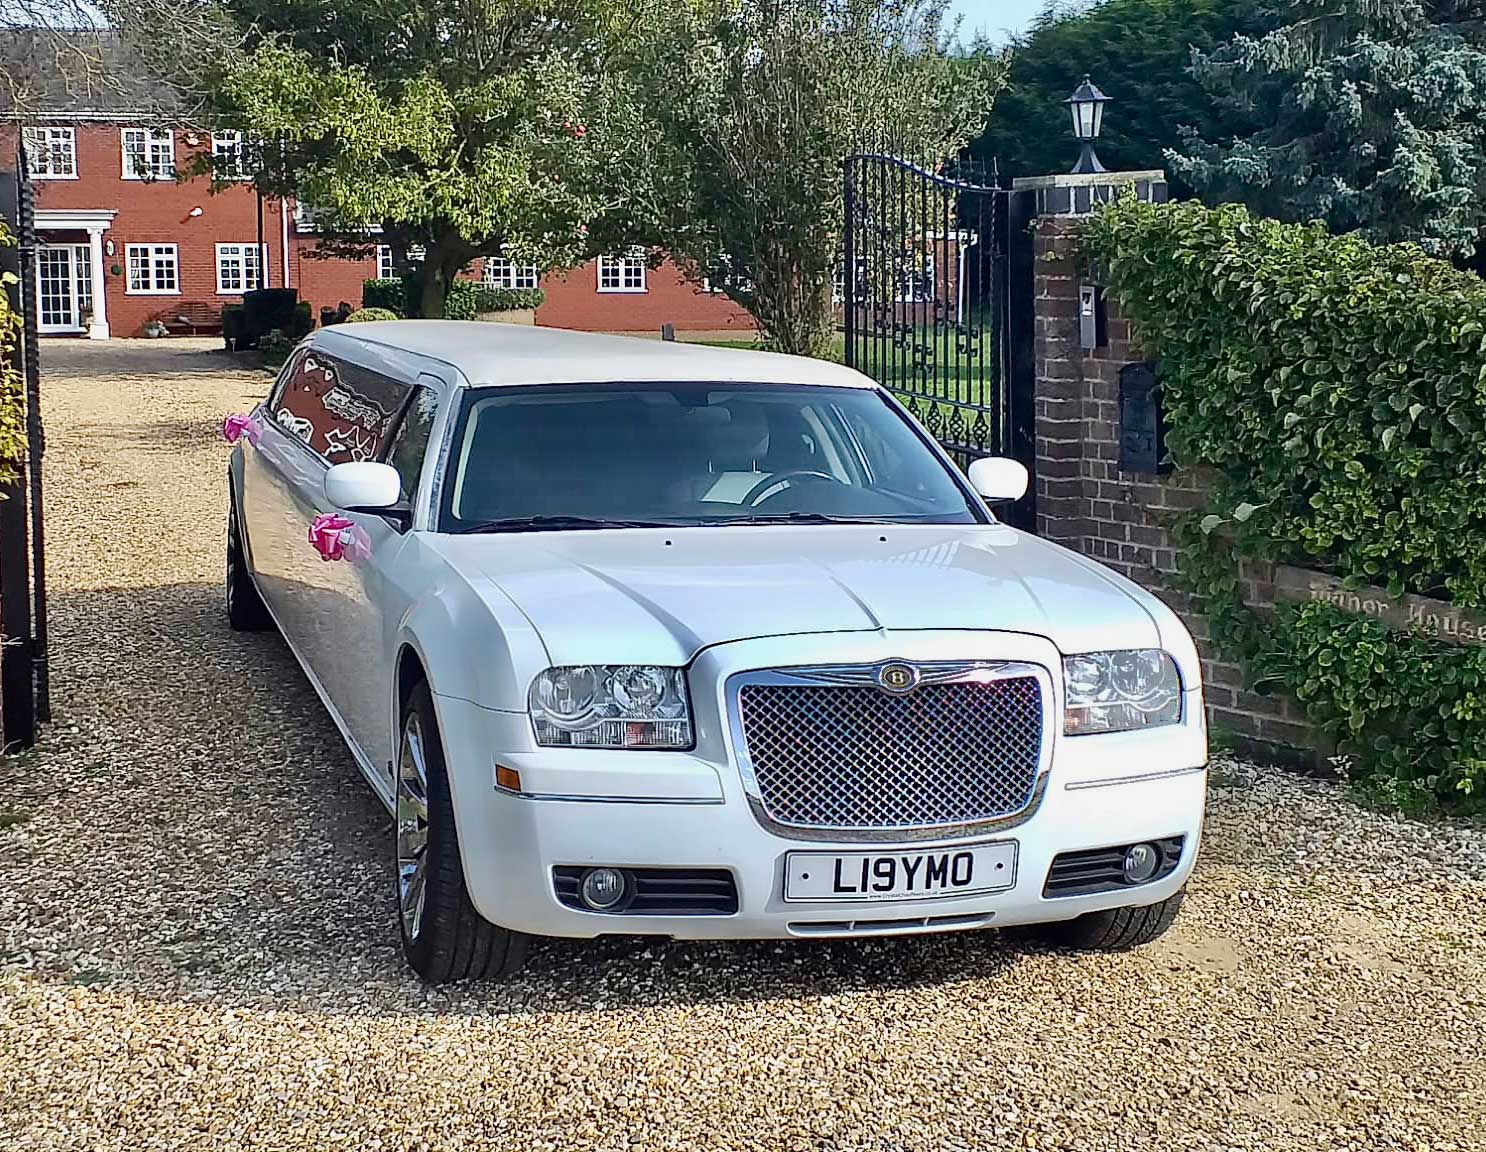 Wedding Limo Hire In Kettering